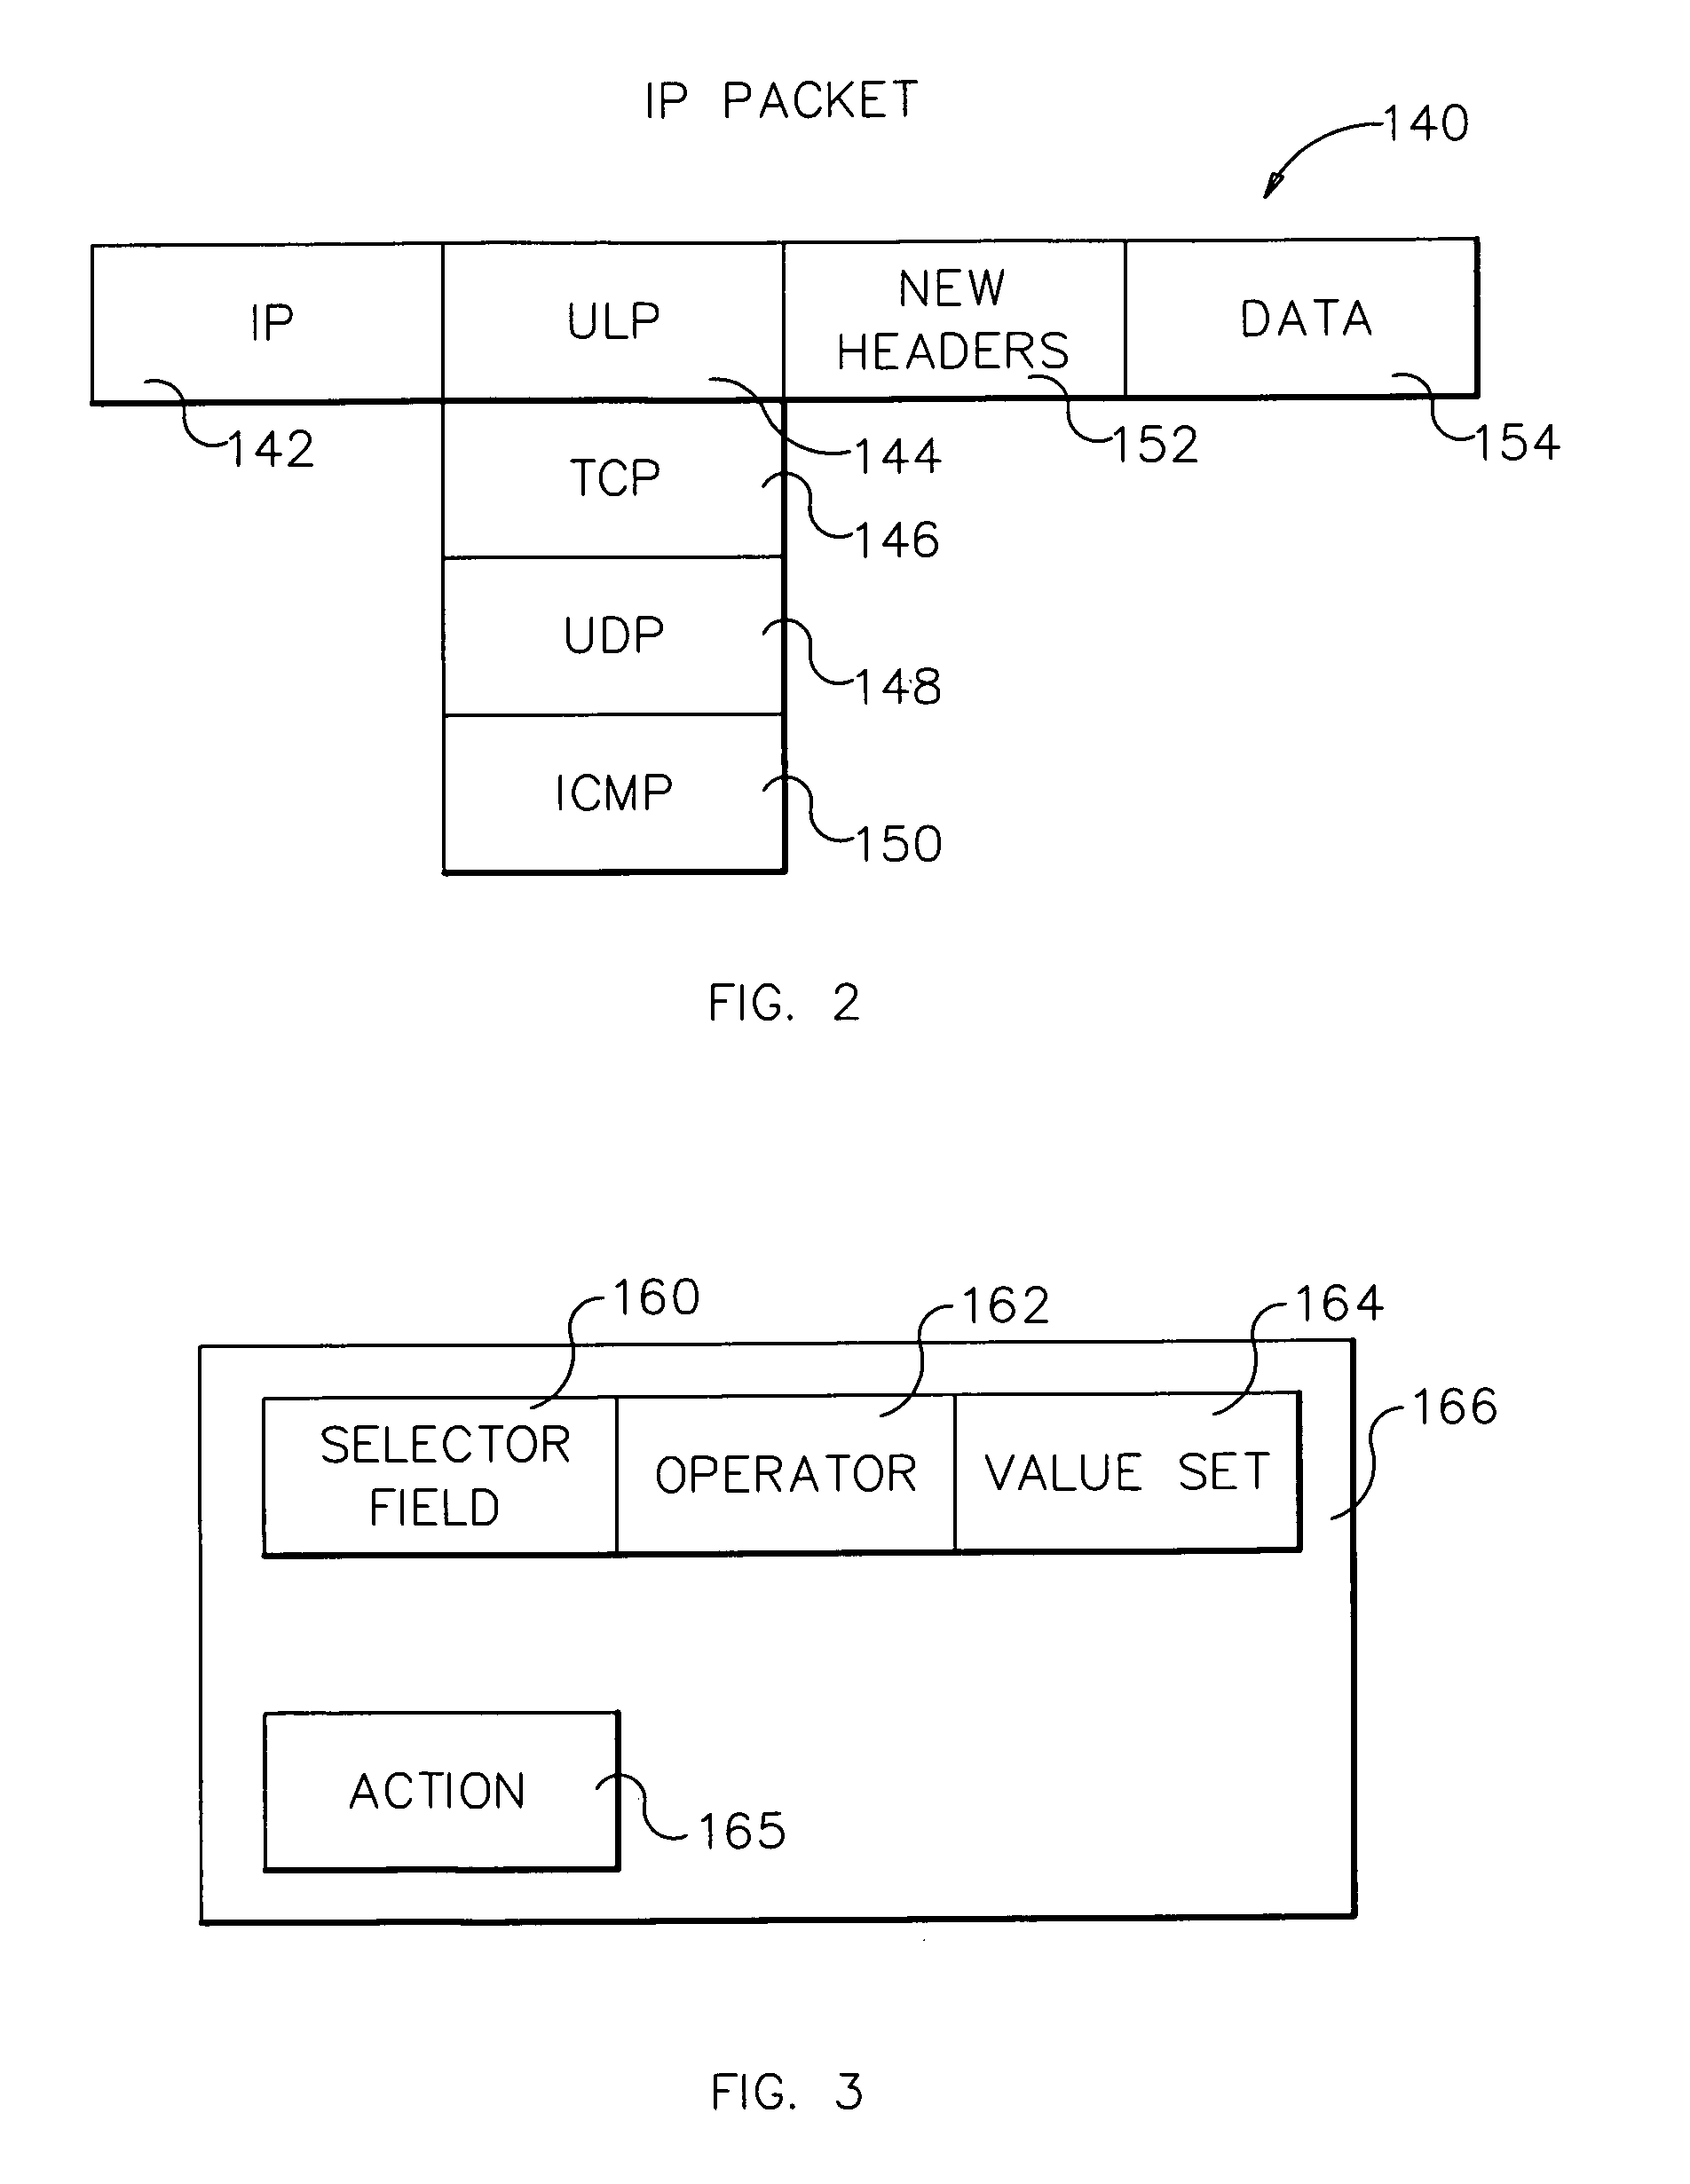 System and method for IP packet filtering based on non-IP packet traffic attributes